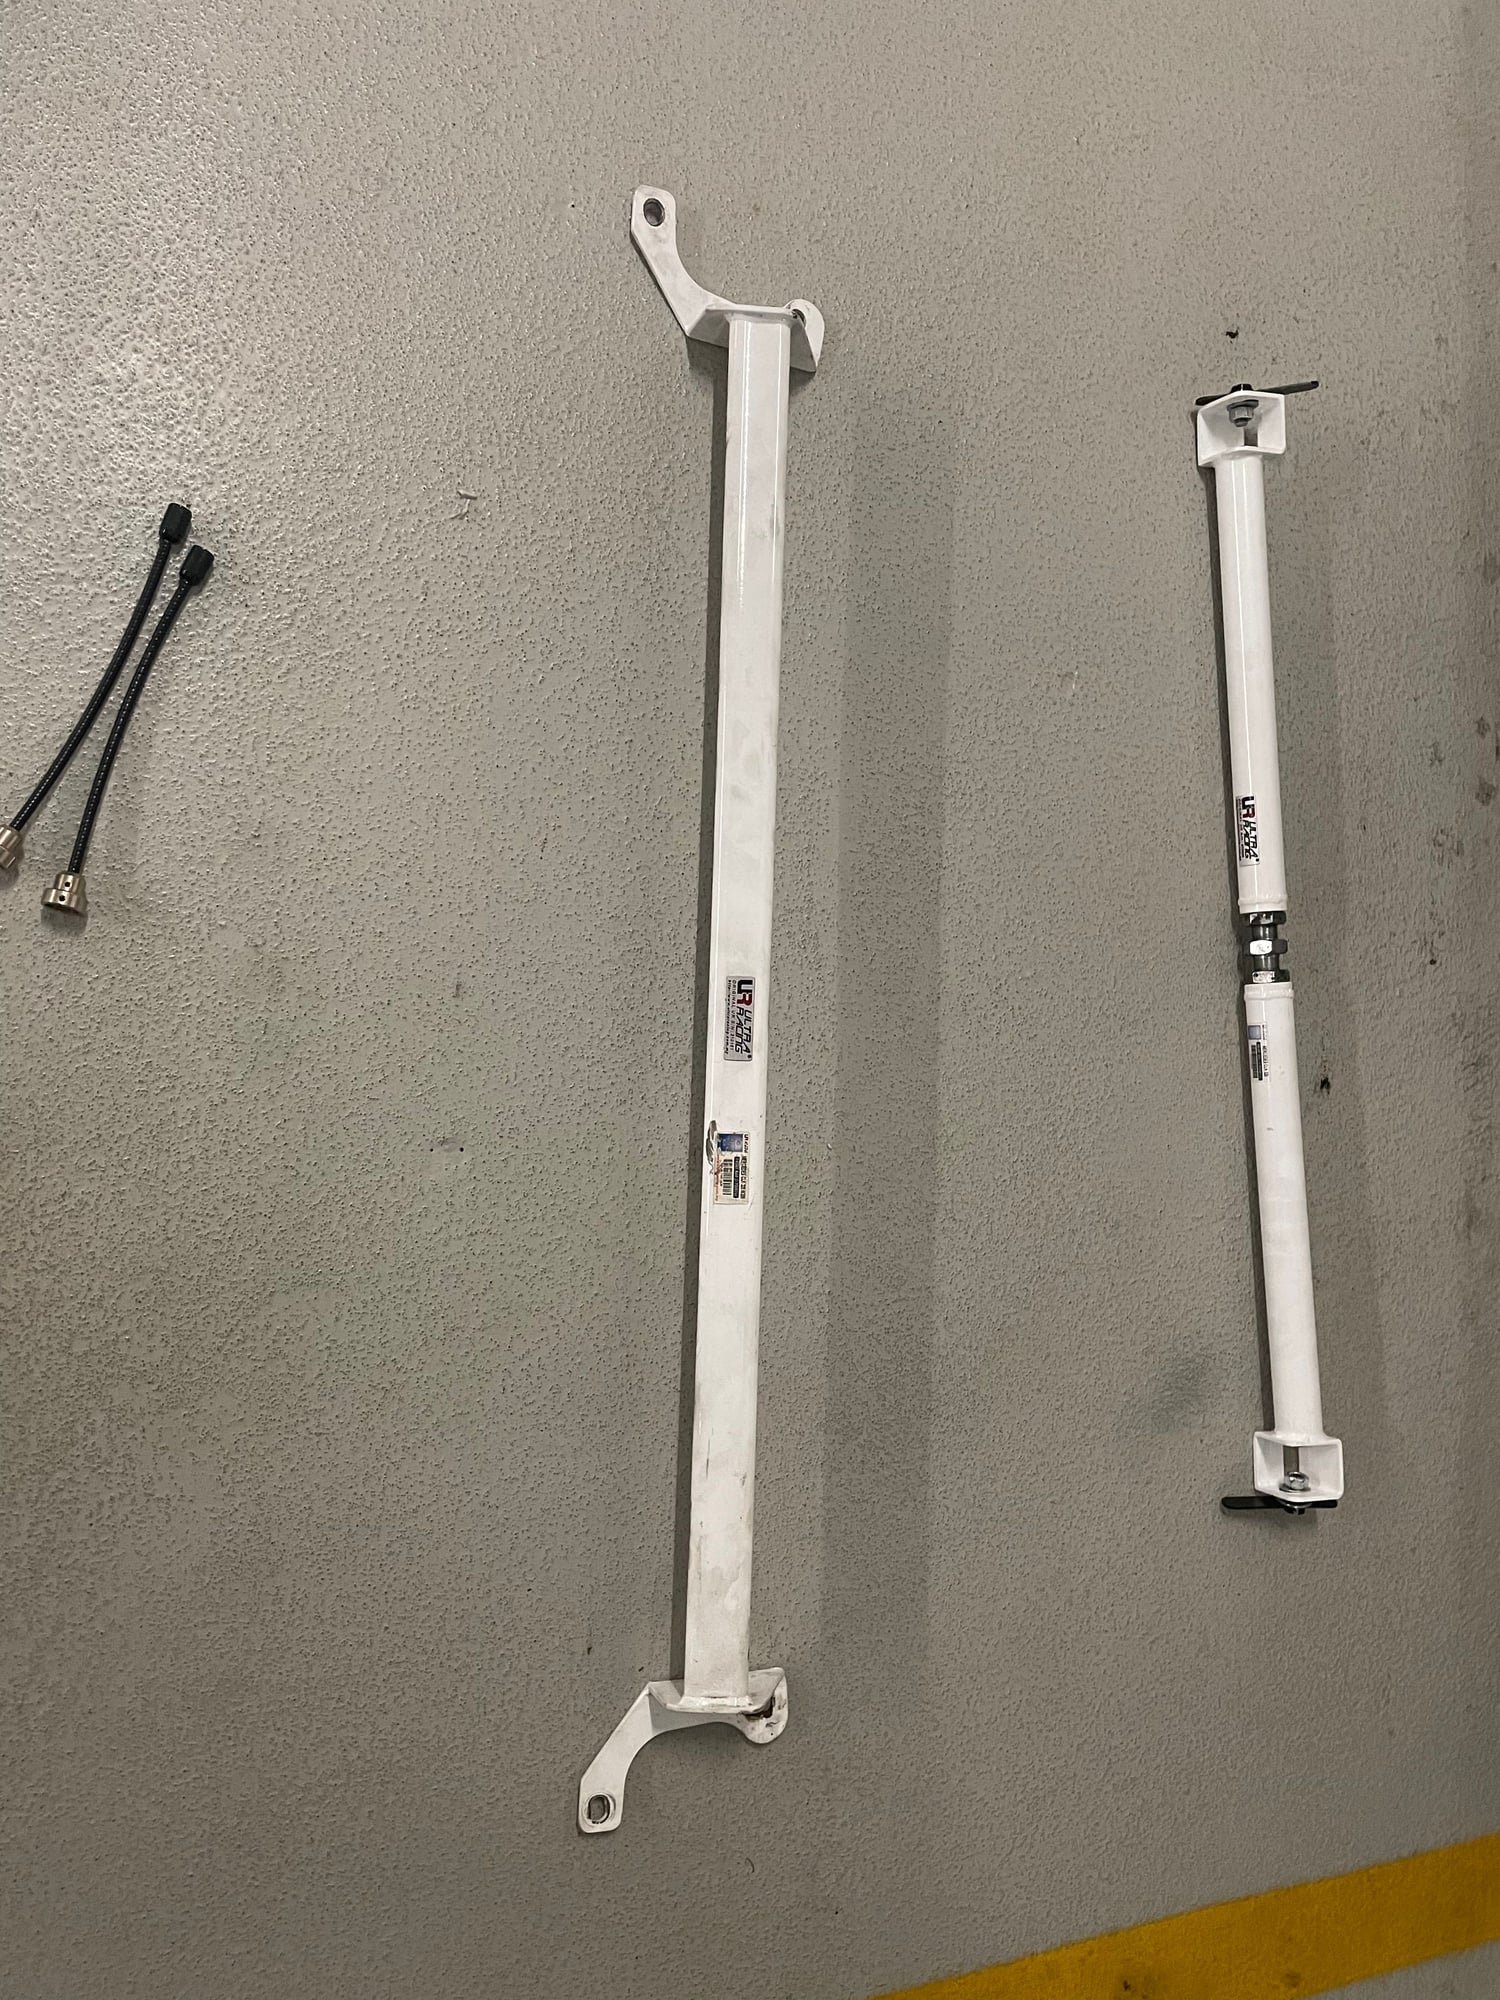 Steering/Suspension - Ultra Racing Mercedes  Strut Bars W203/W209 CLK or C-Class - Used - 2004 to 2008 Mercedes-Benz C320 - Vancouver, BC V6J4B7, Canada